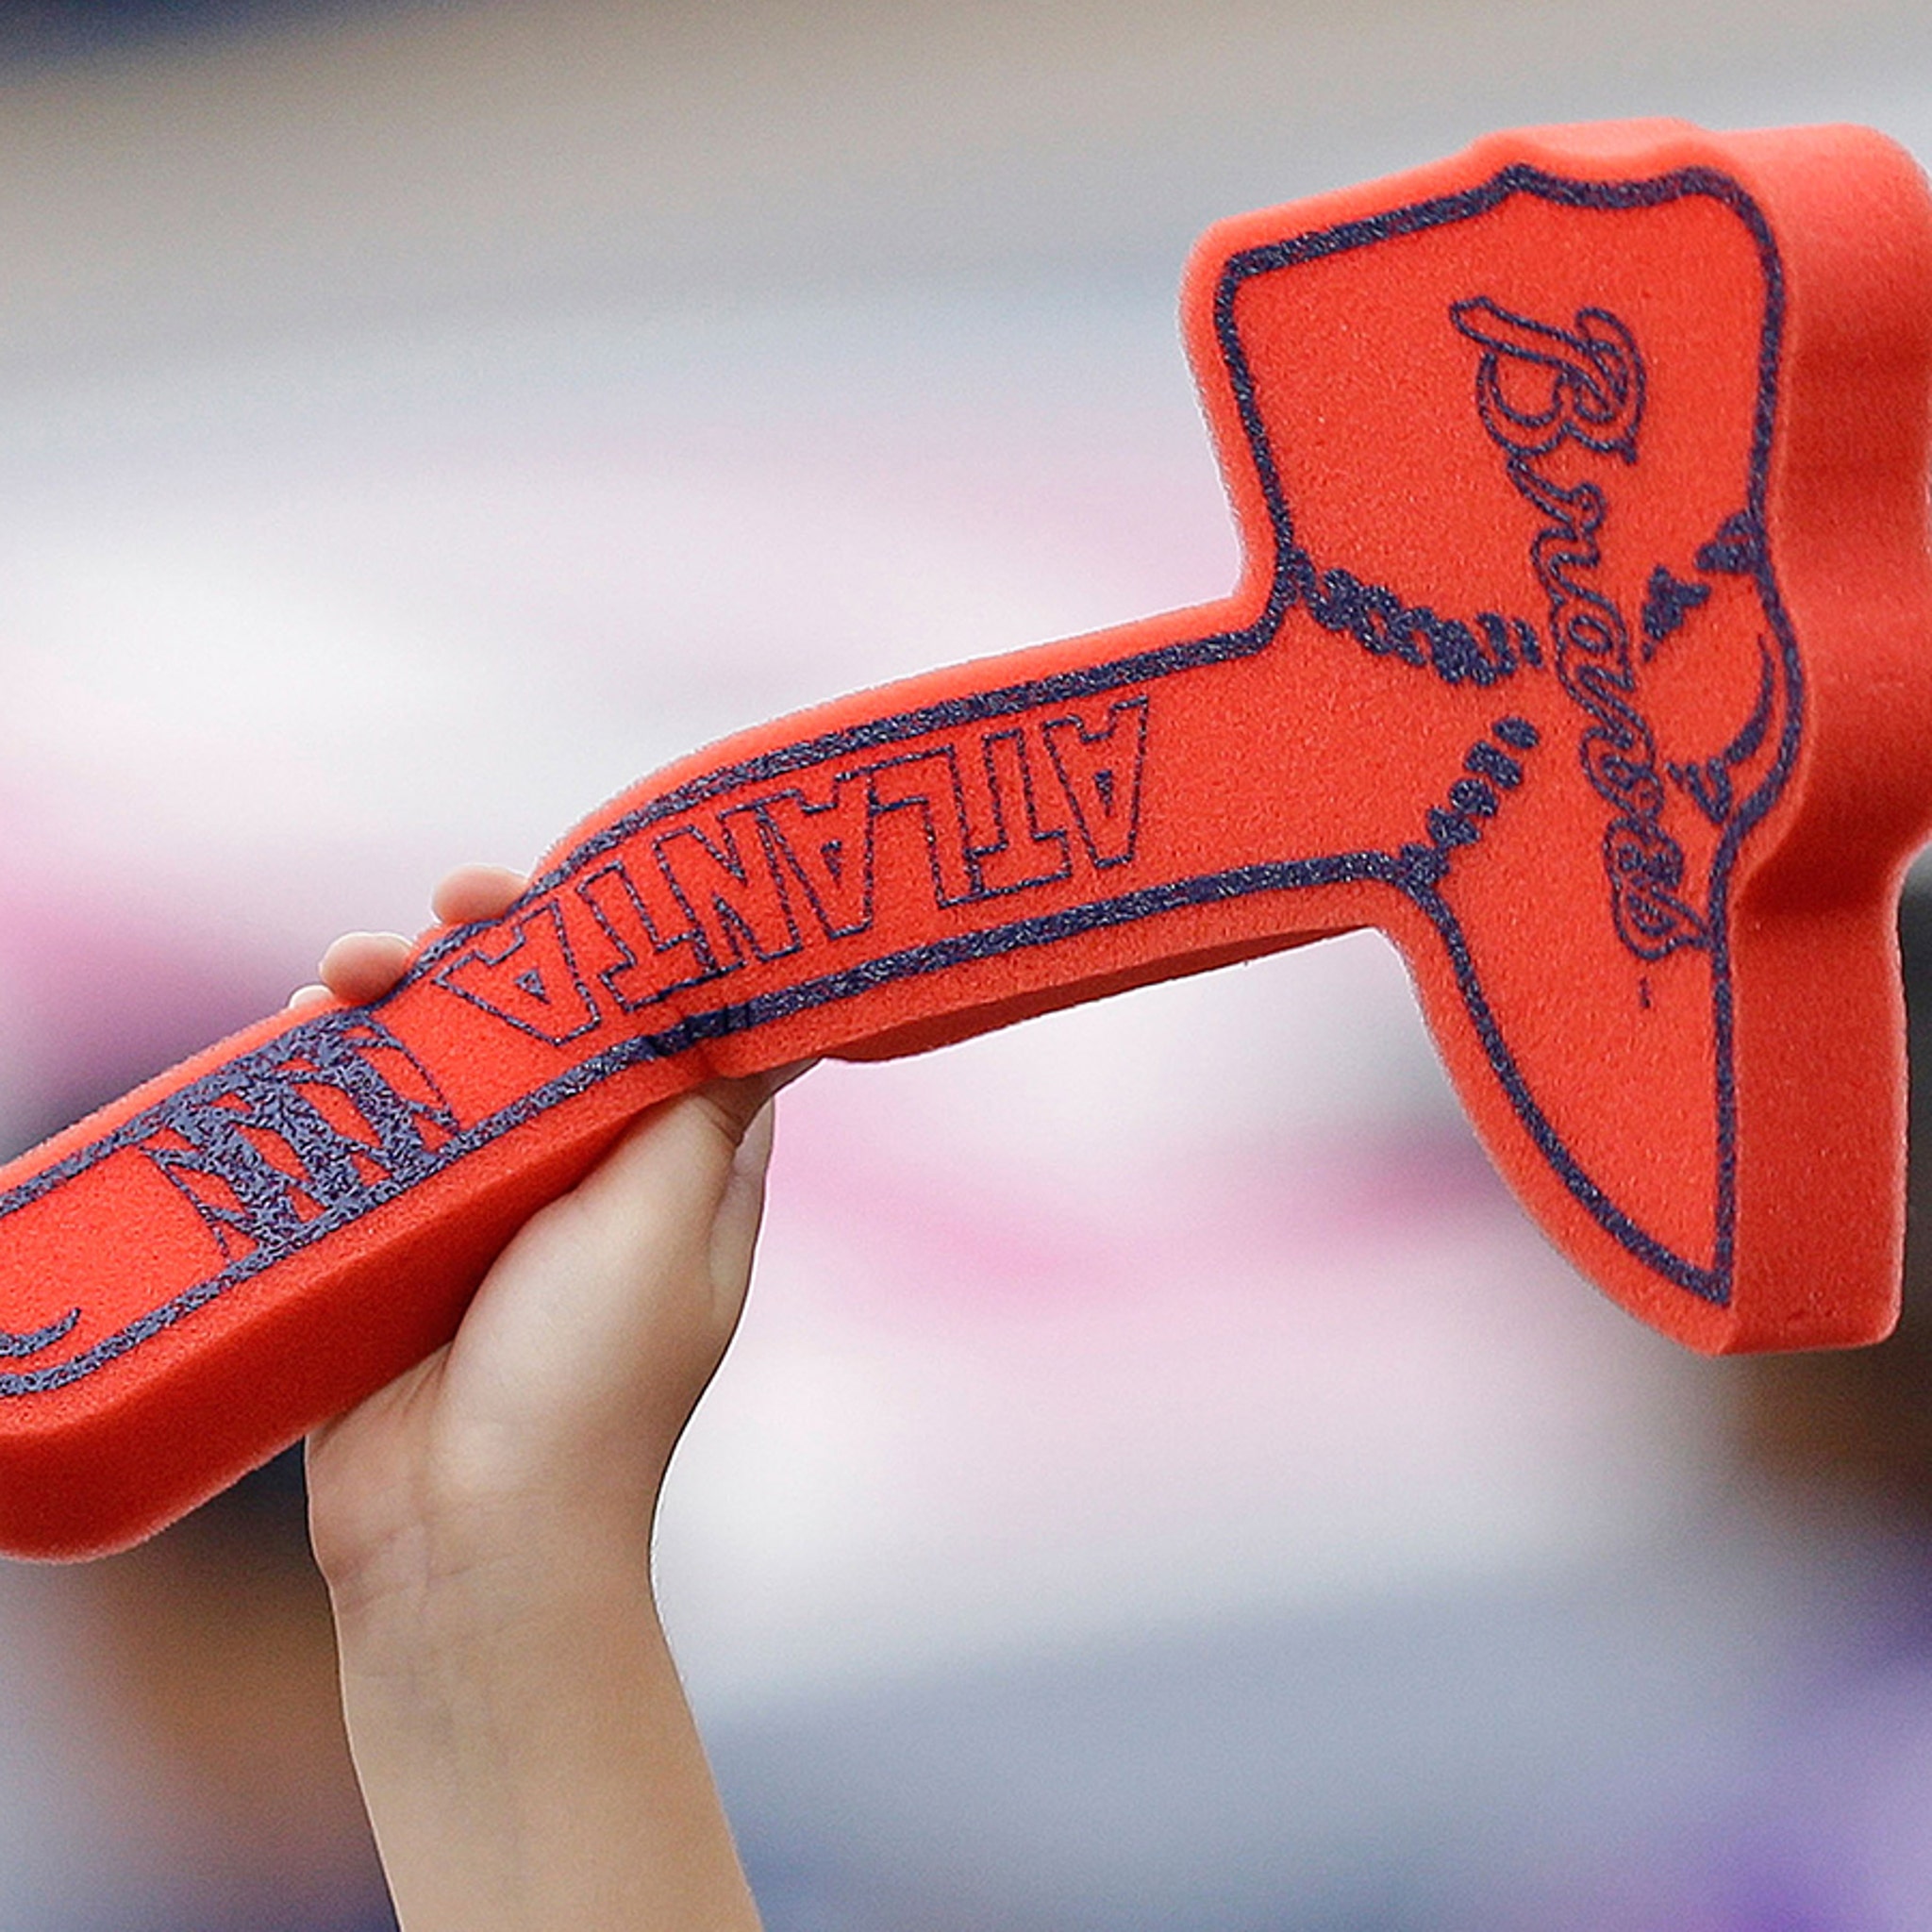 Atlanta Braves Social Media Round-Up: Musings and What Not